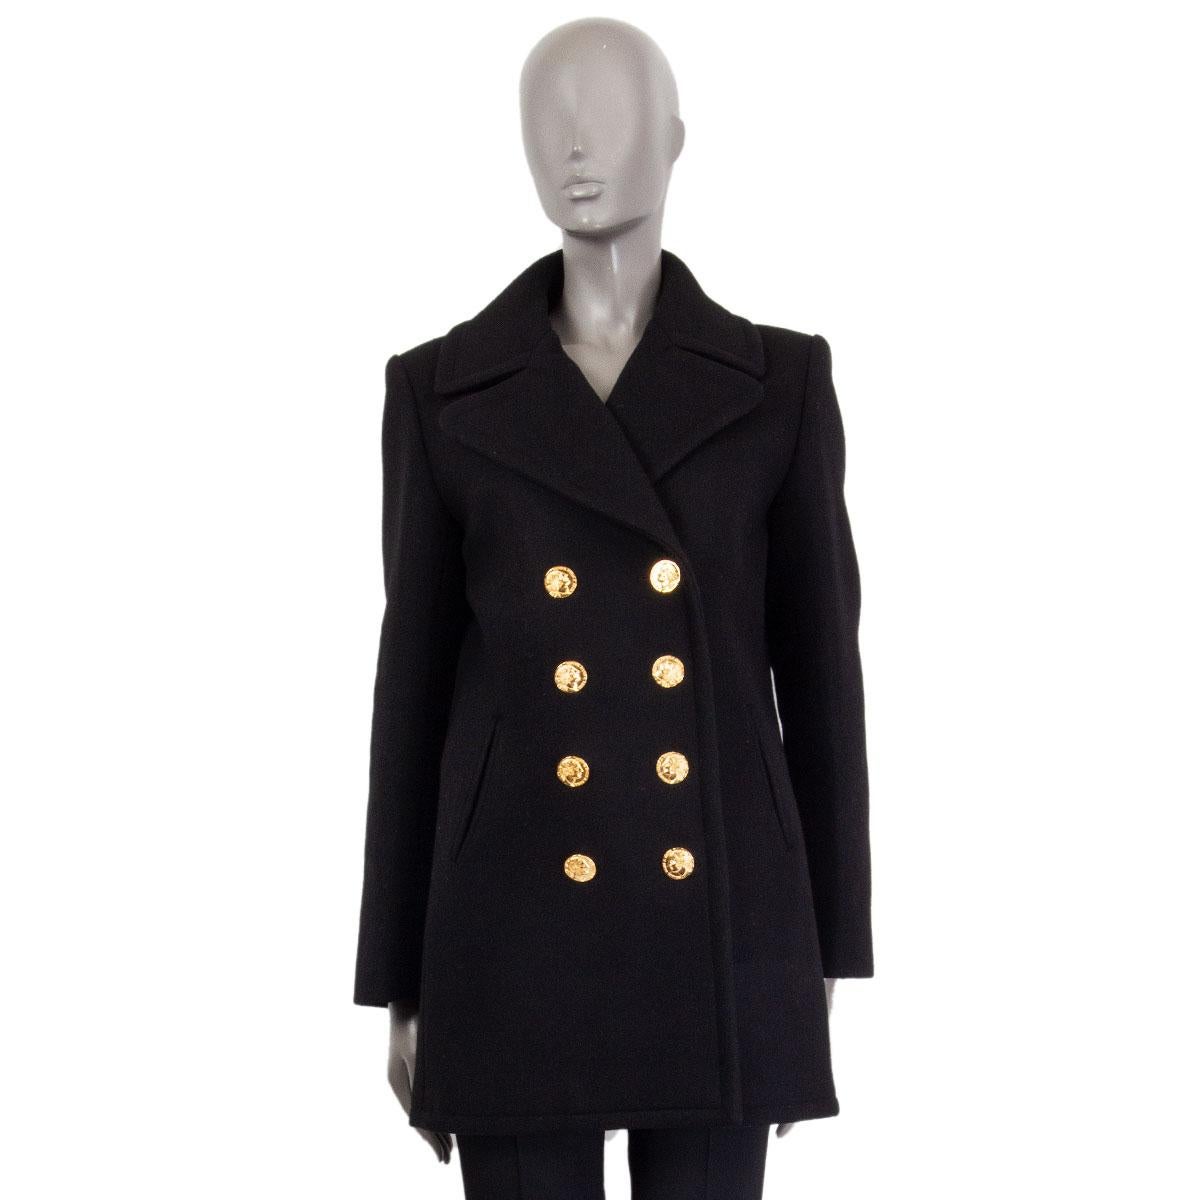 100% authentic Chanel Rome double-breasted Pea-Coat from the Pre-Fall 2016 Métiers d'Art Collection   in black cashmere (96%) and wool (4%) with notched lapels, structured shoulders and three buttoned sleeves-hem. Closes with four gold-tone